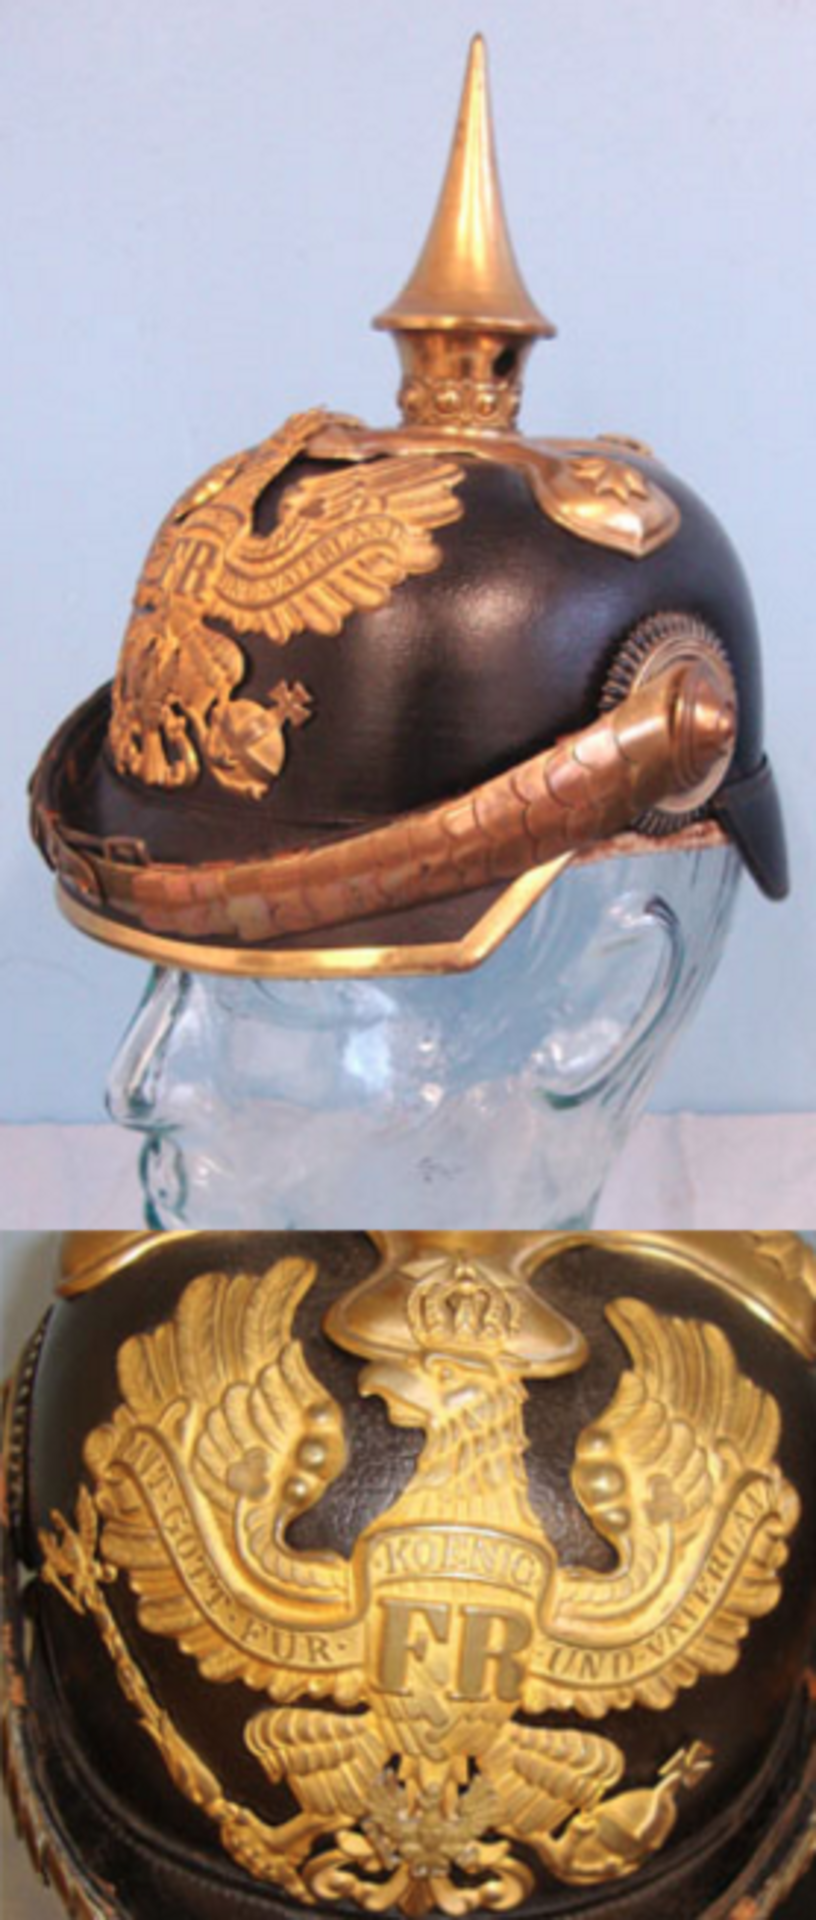 SUPERB, Original, WW1 Era, Prussian Officer's Pickelhaube Helmet With Imperial State Cockades - Image 2 of 3